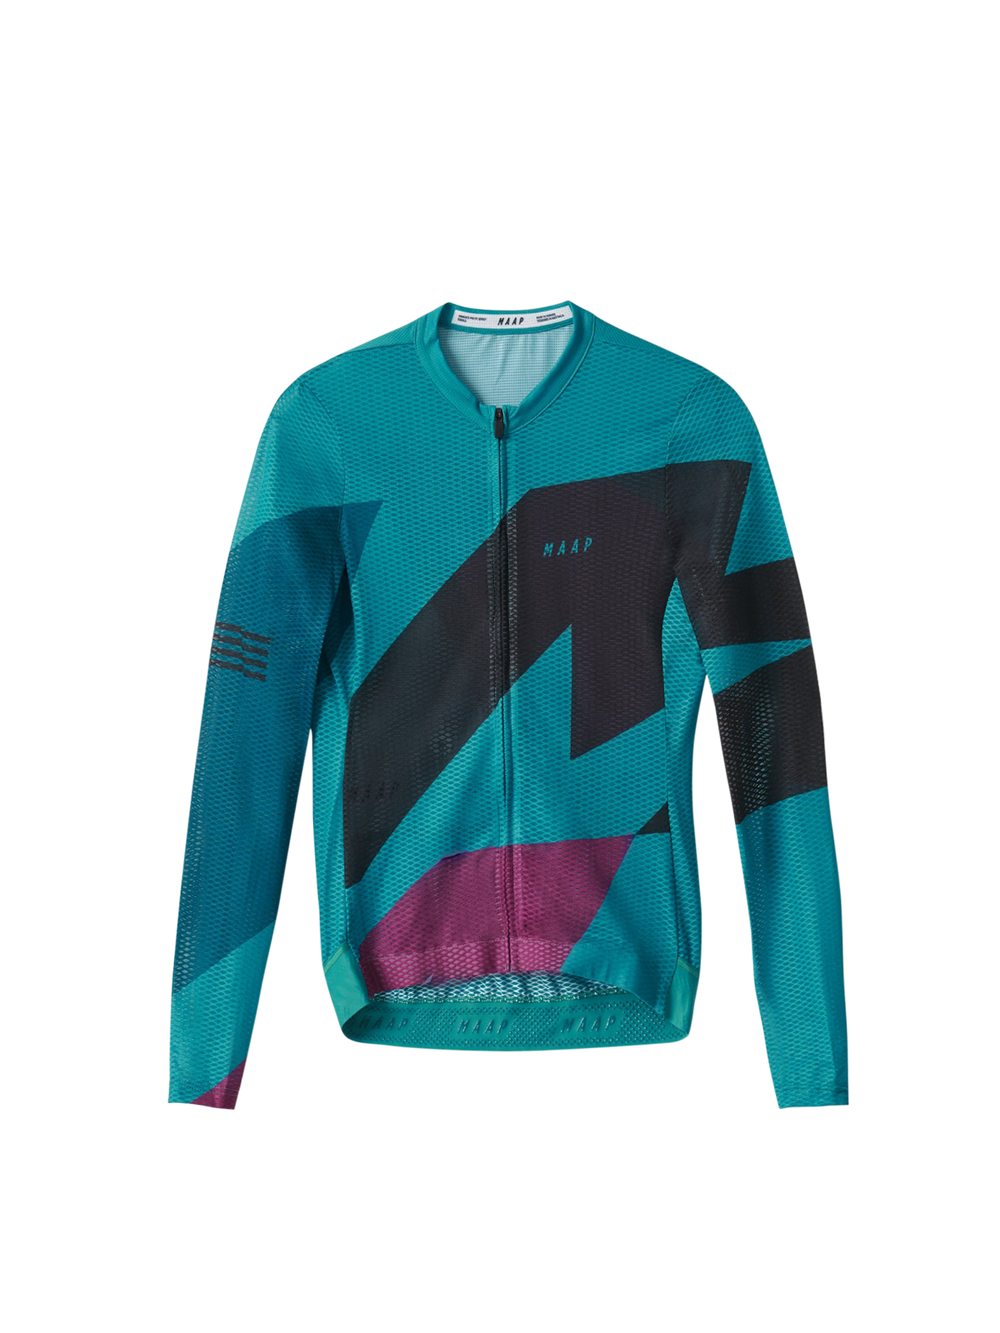 Product Image for Women's Emerge Ultralight Pro LS Jersey